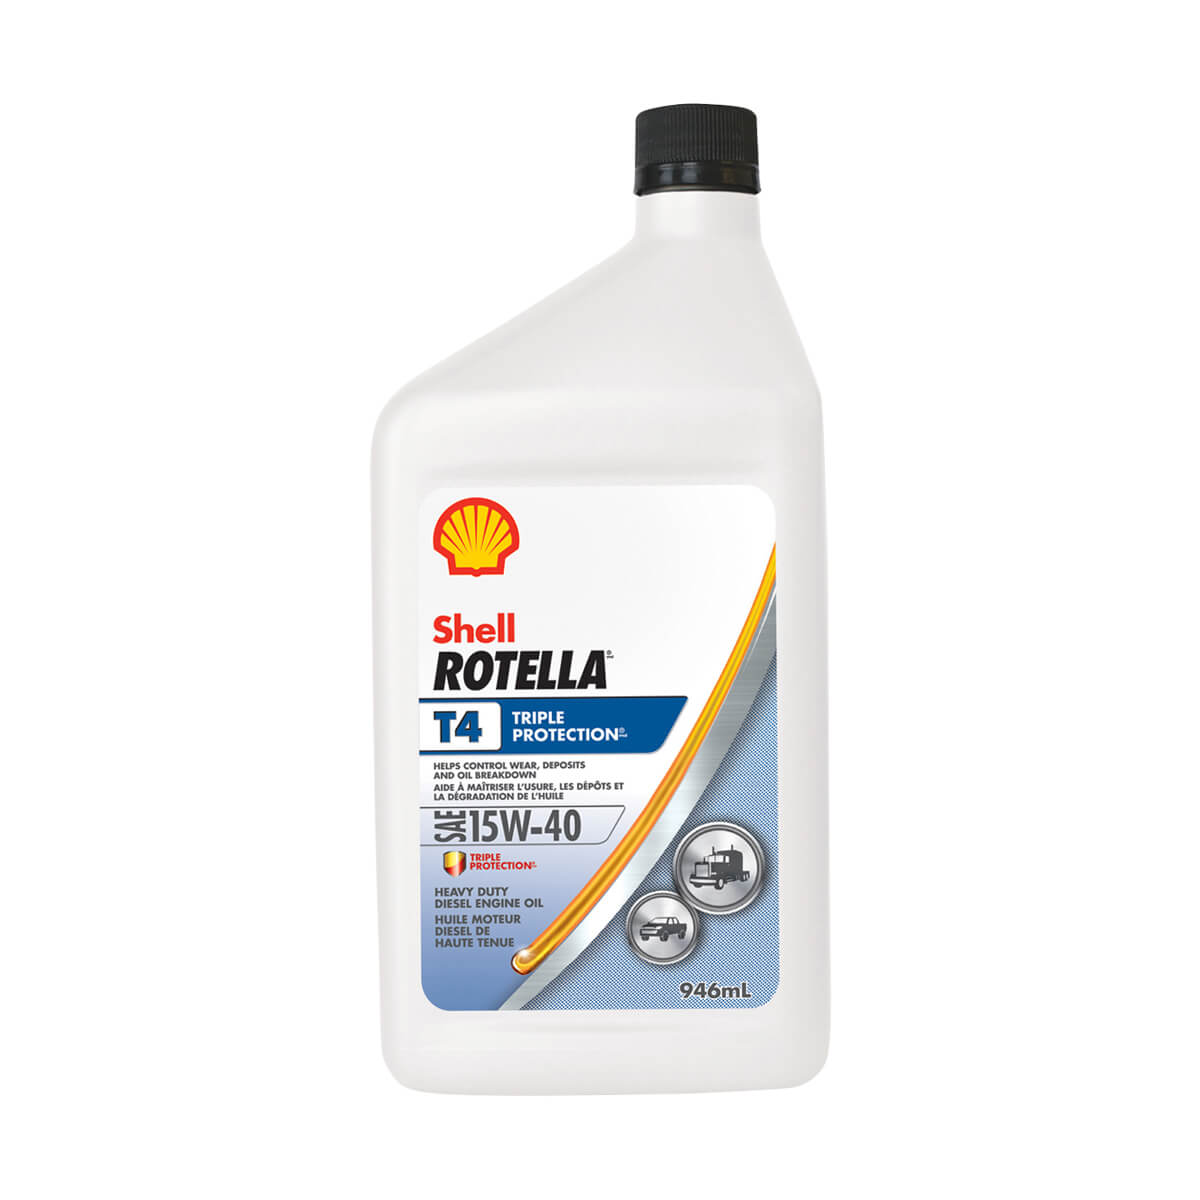 Shell Rotella T4 Triple Protection 15W-40 - 946 ml